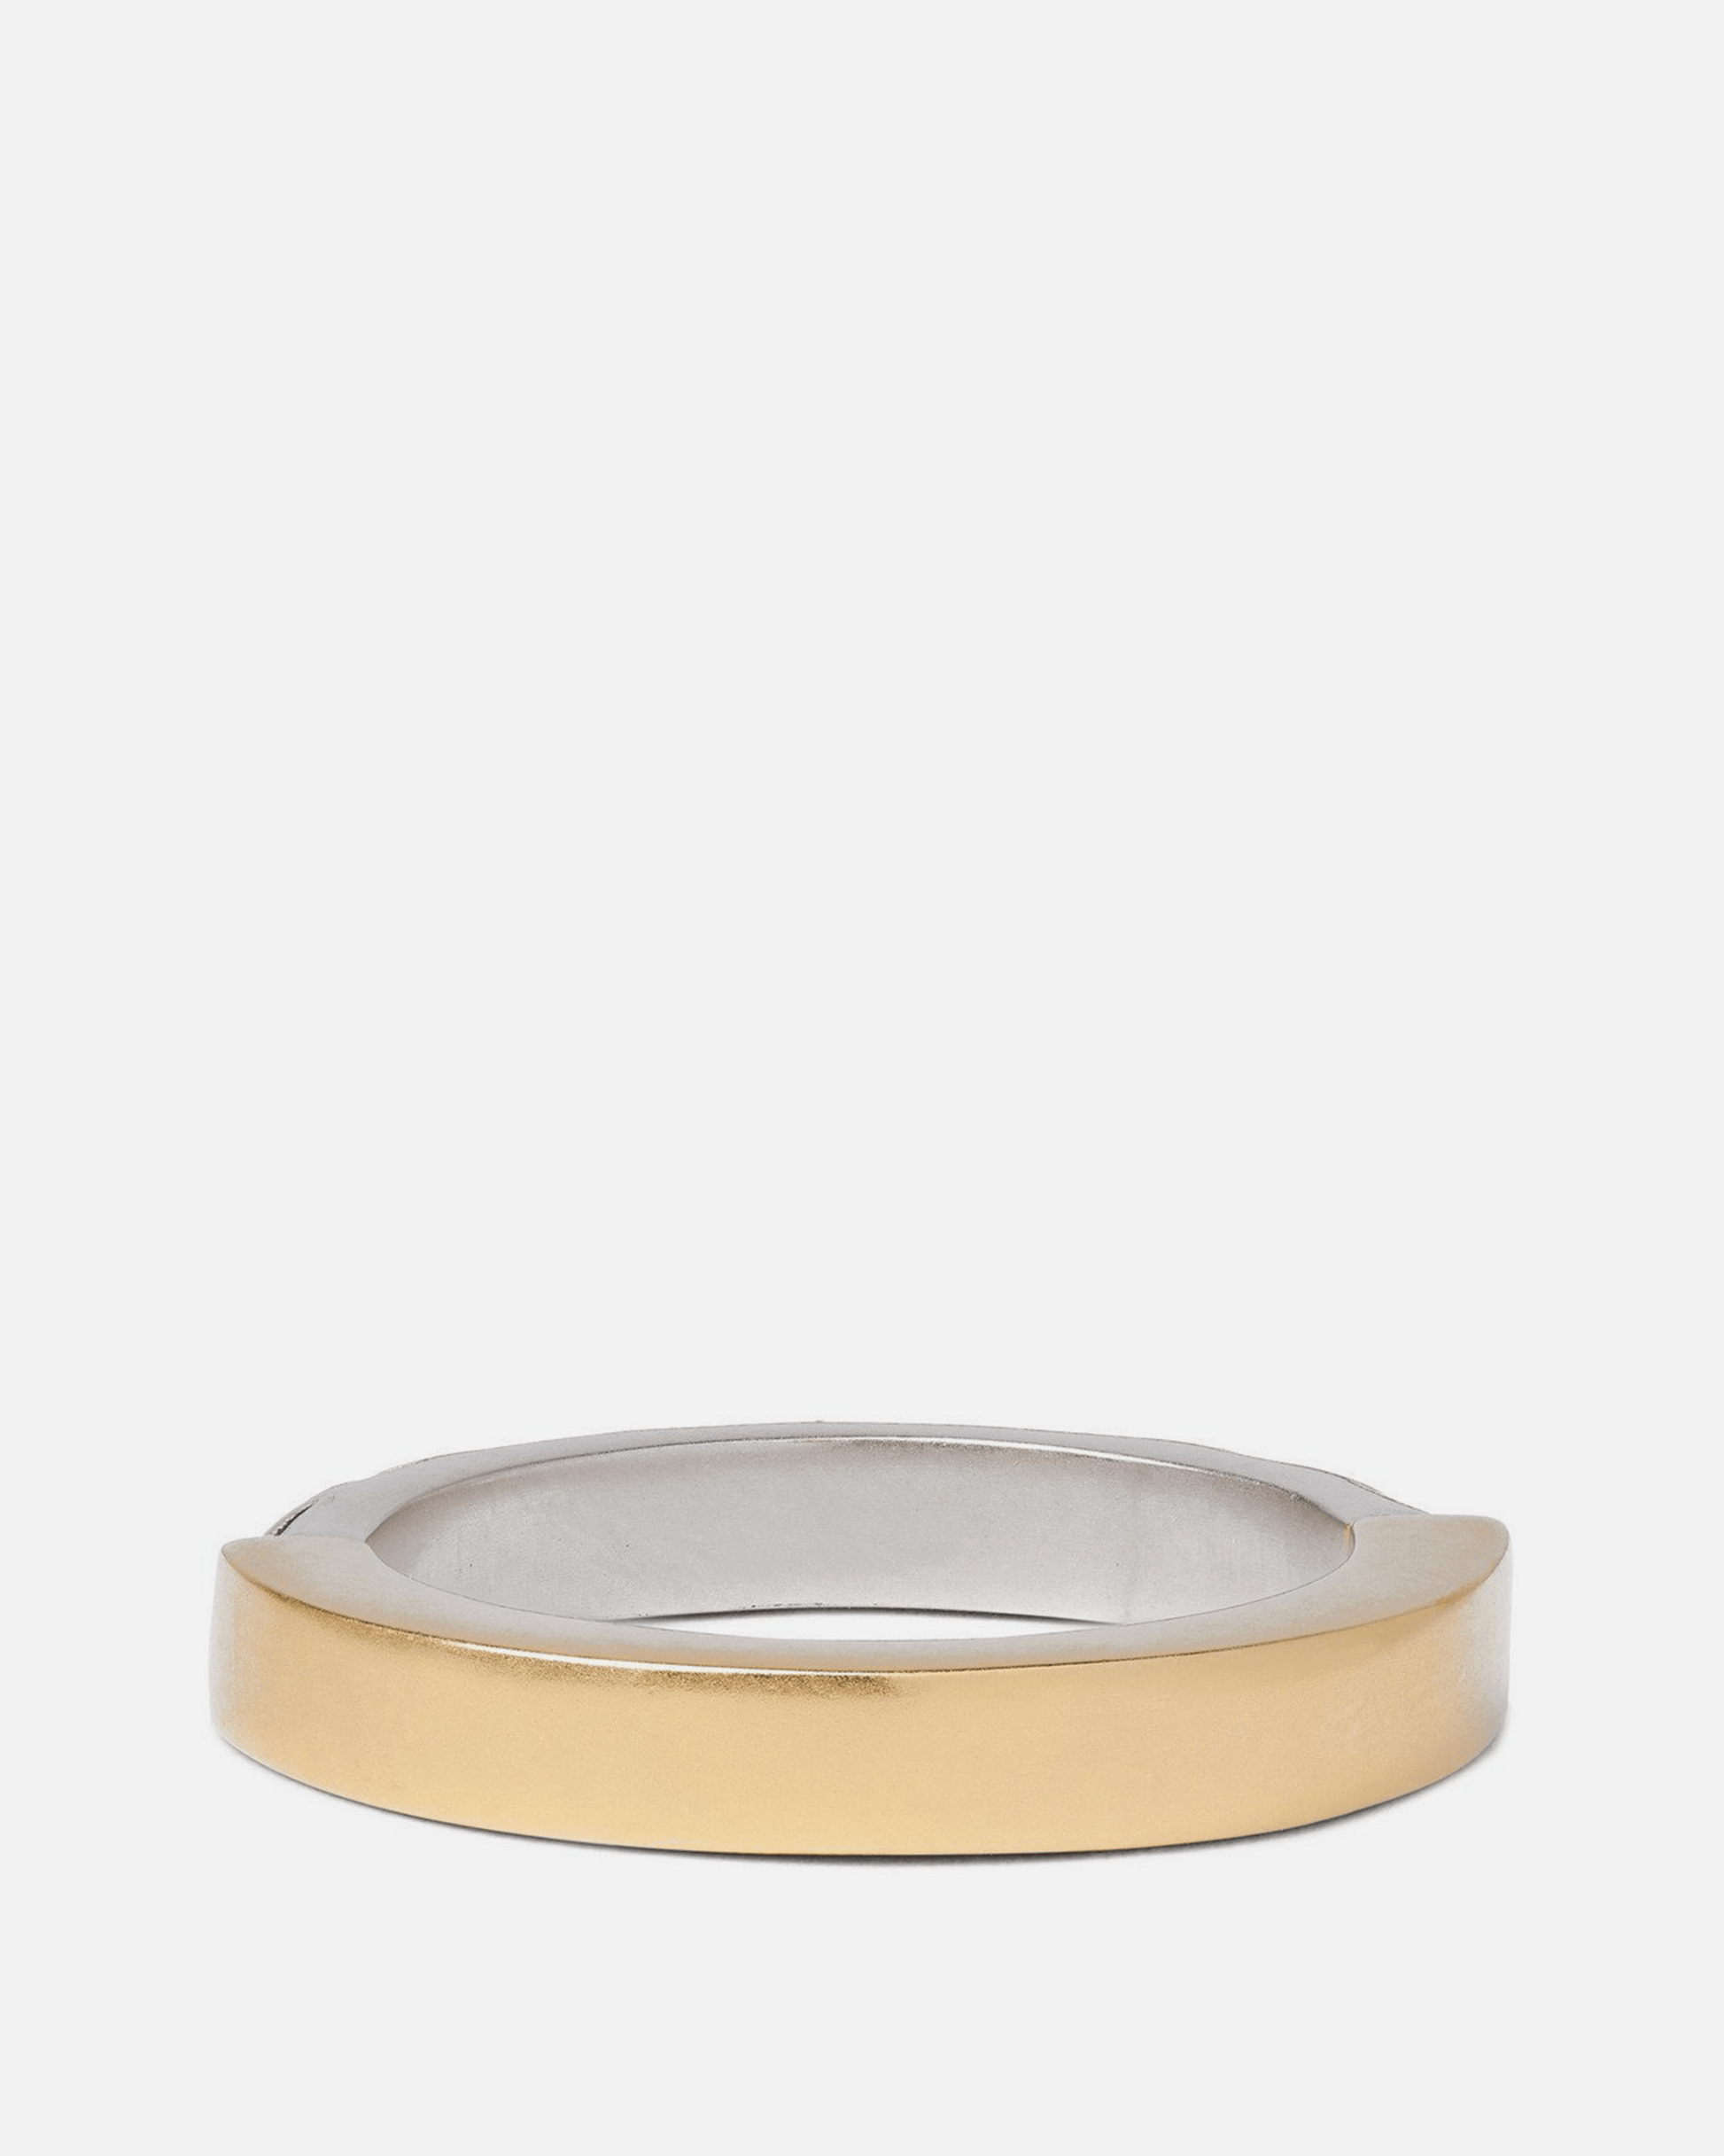 Maison Margiela Jewelry Double Design Ring in Silver